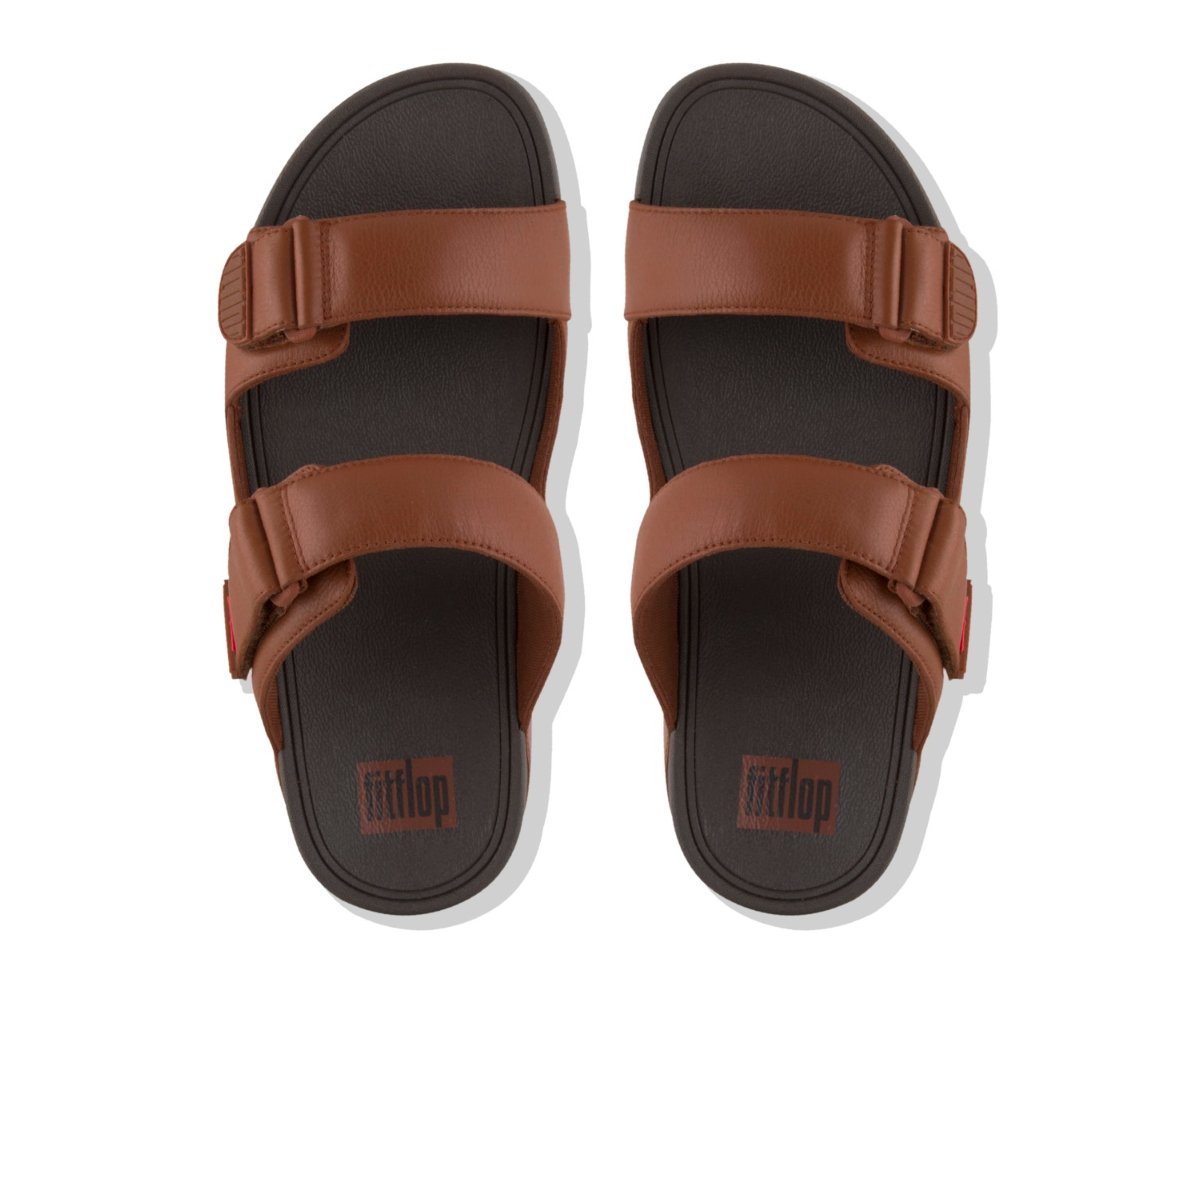 FitFlop GOGH MOC Adjustable Leather Slides Dark Tan top view